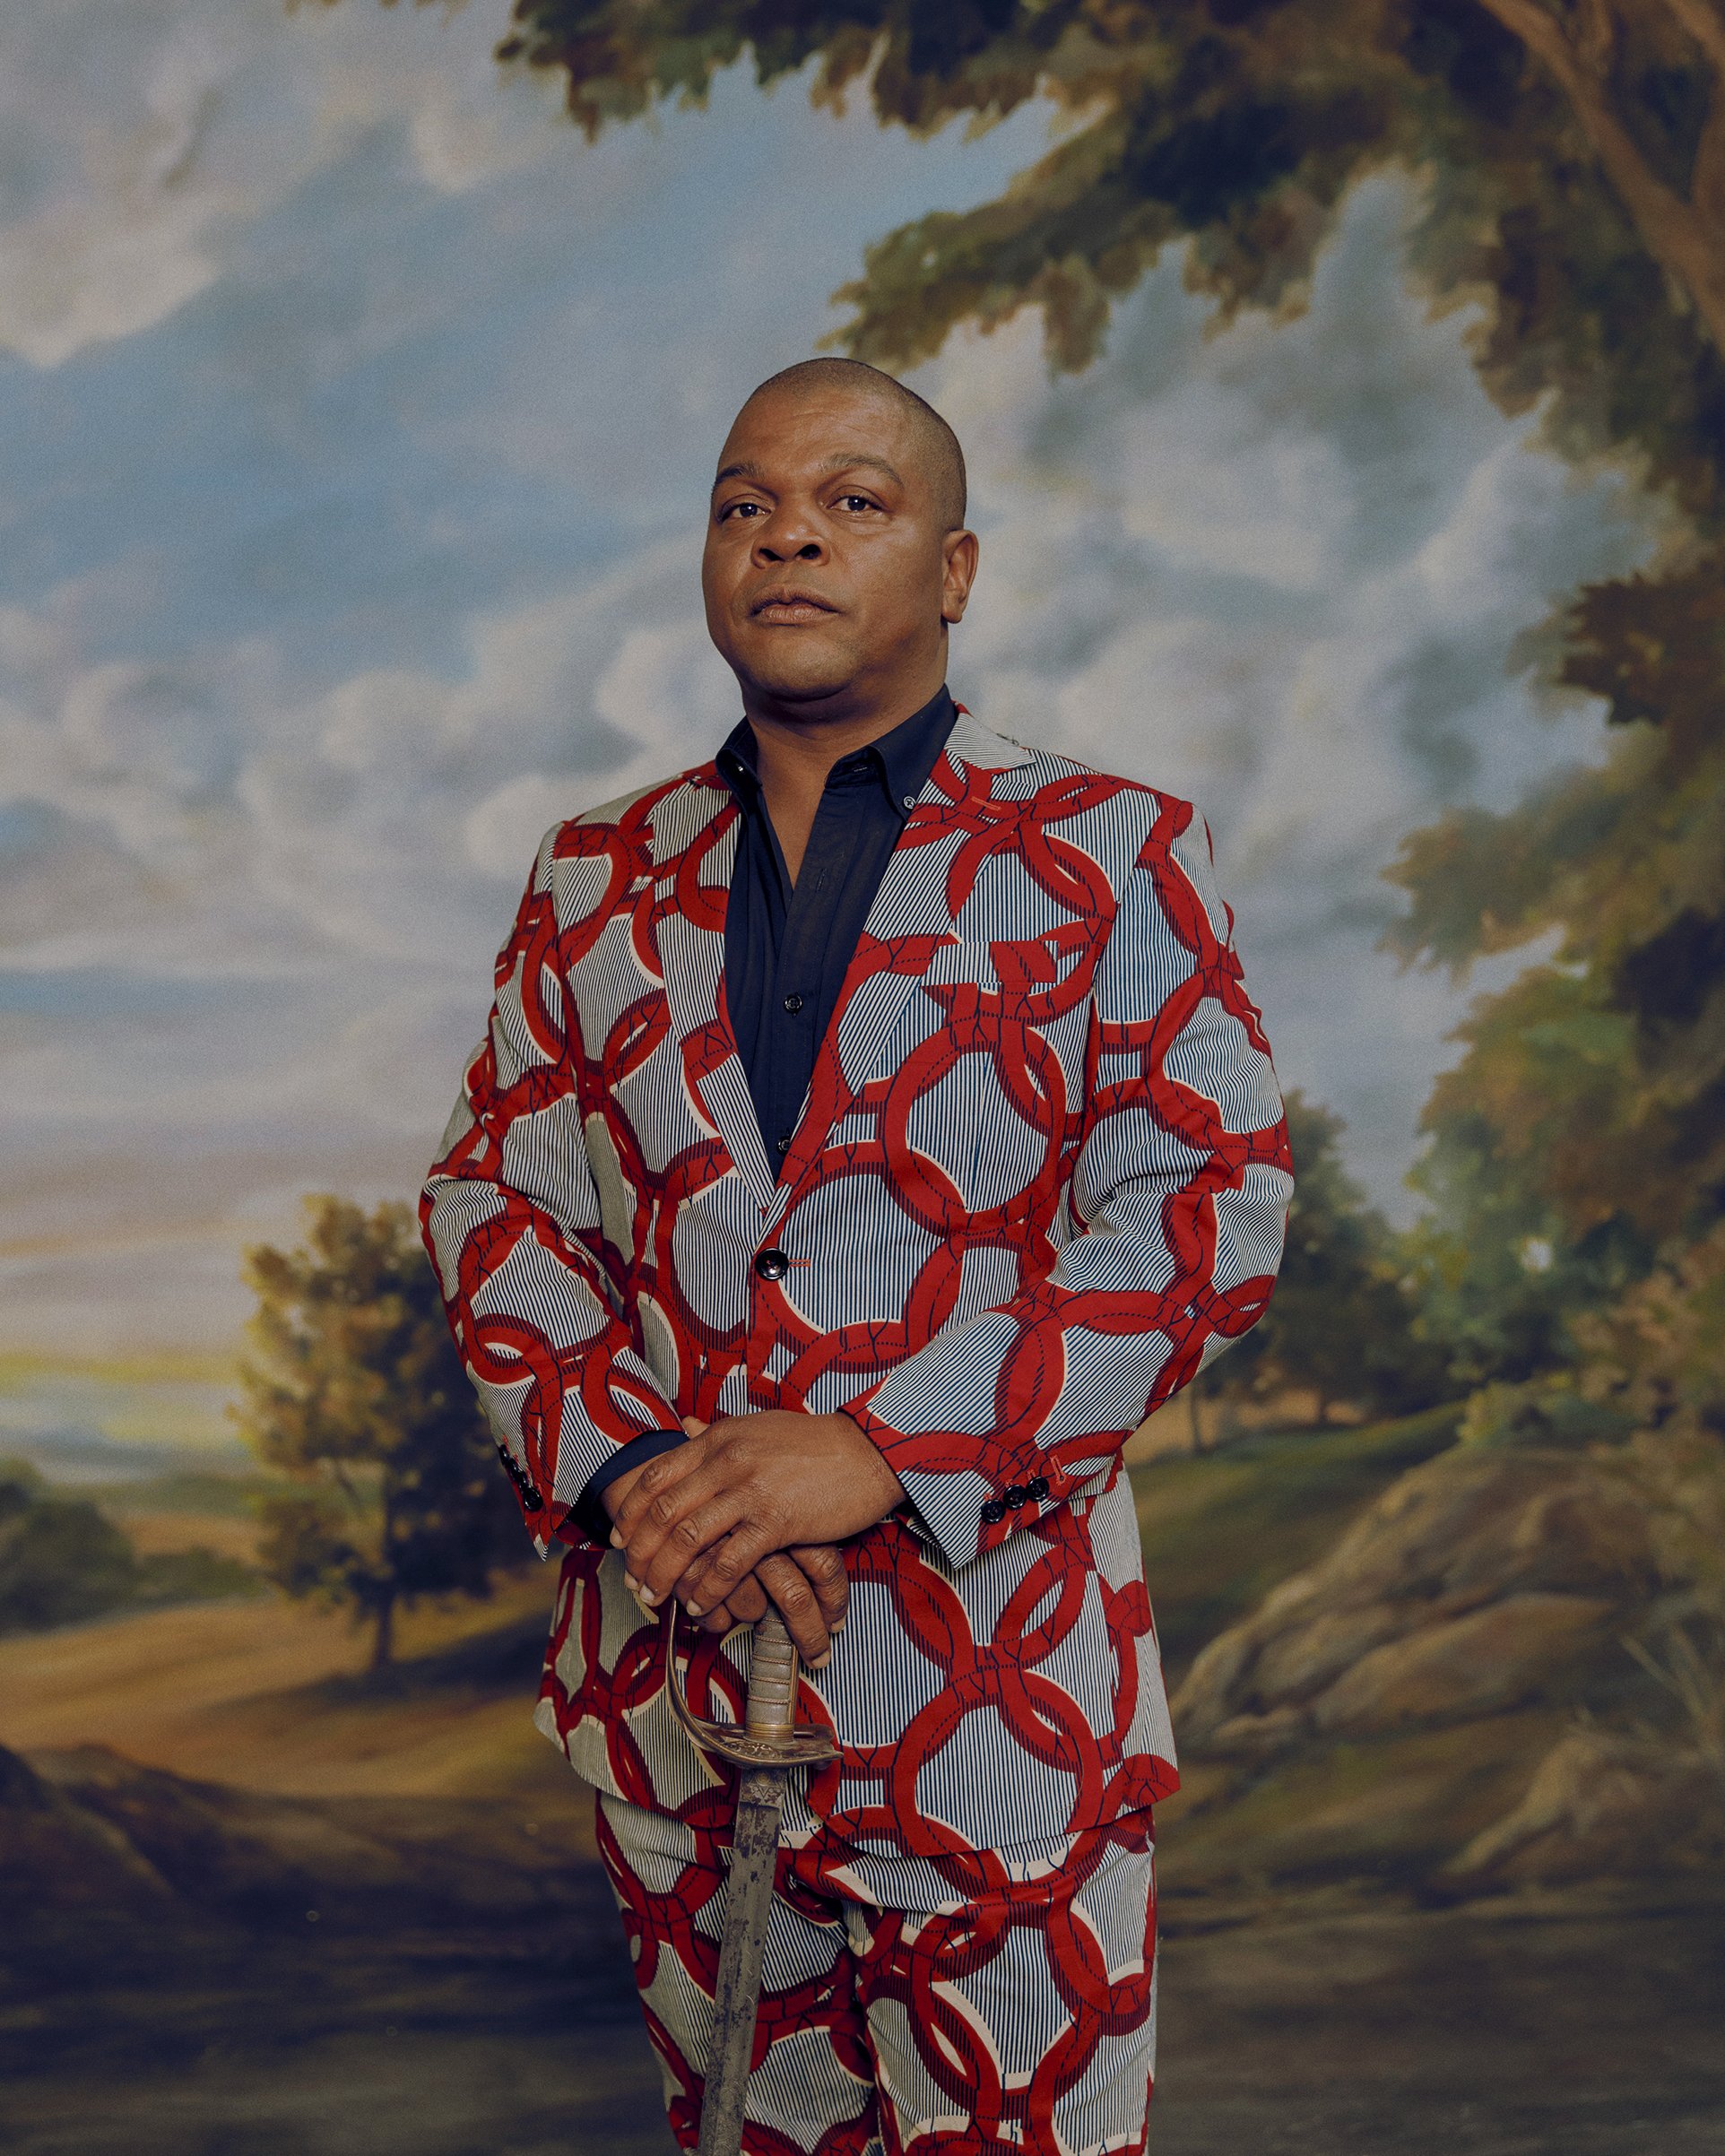 Kehinde wiley on TIME 100 list [TIME Magazine]